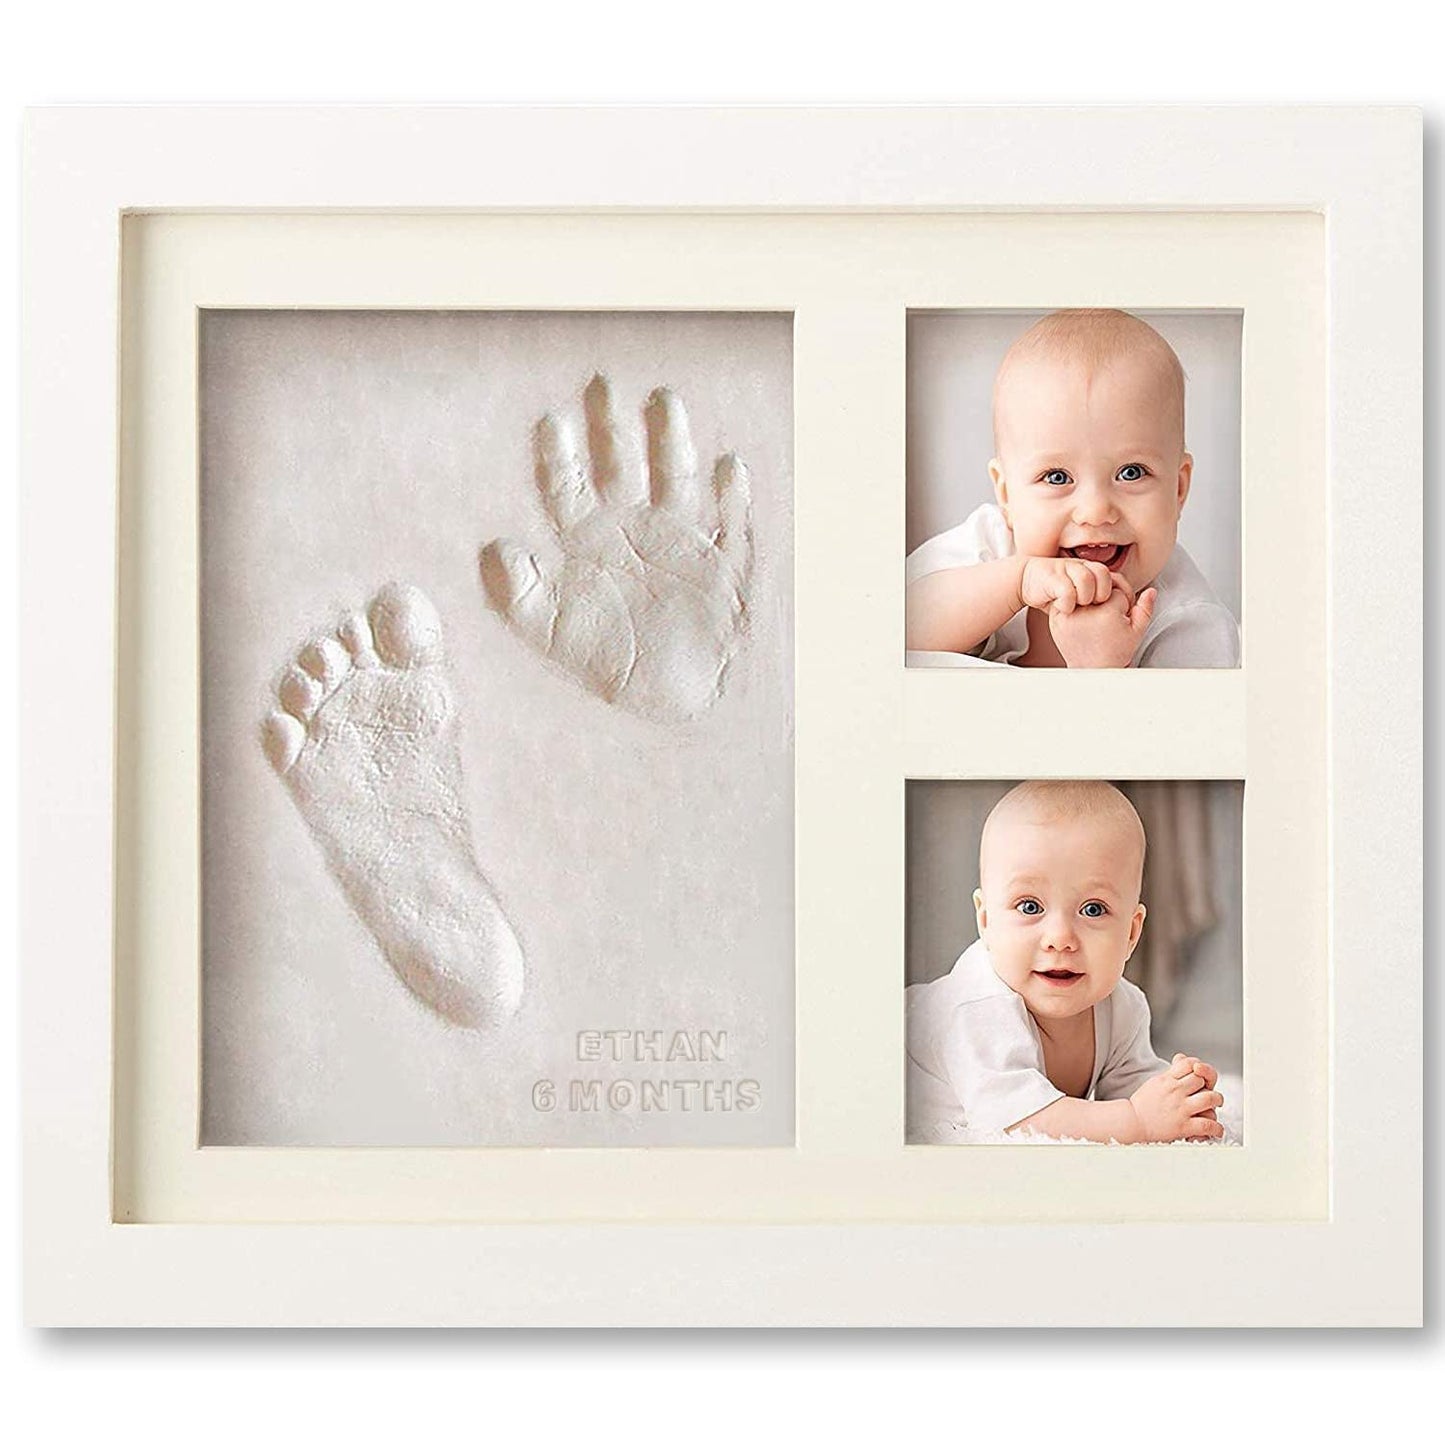 The life print : Baby Hand and Footprint Kit in Adorable Keepsake Frame – Perfect Baby Shower Gift and Nursery Decor!